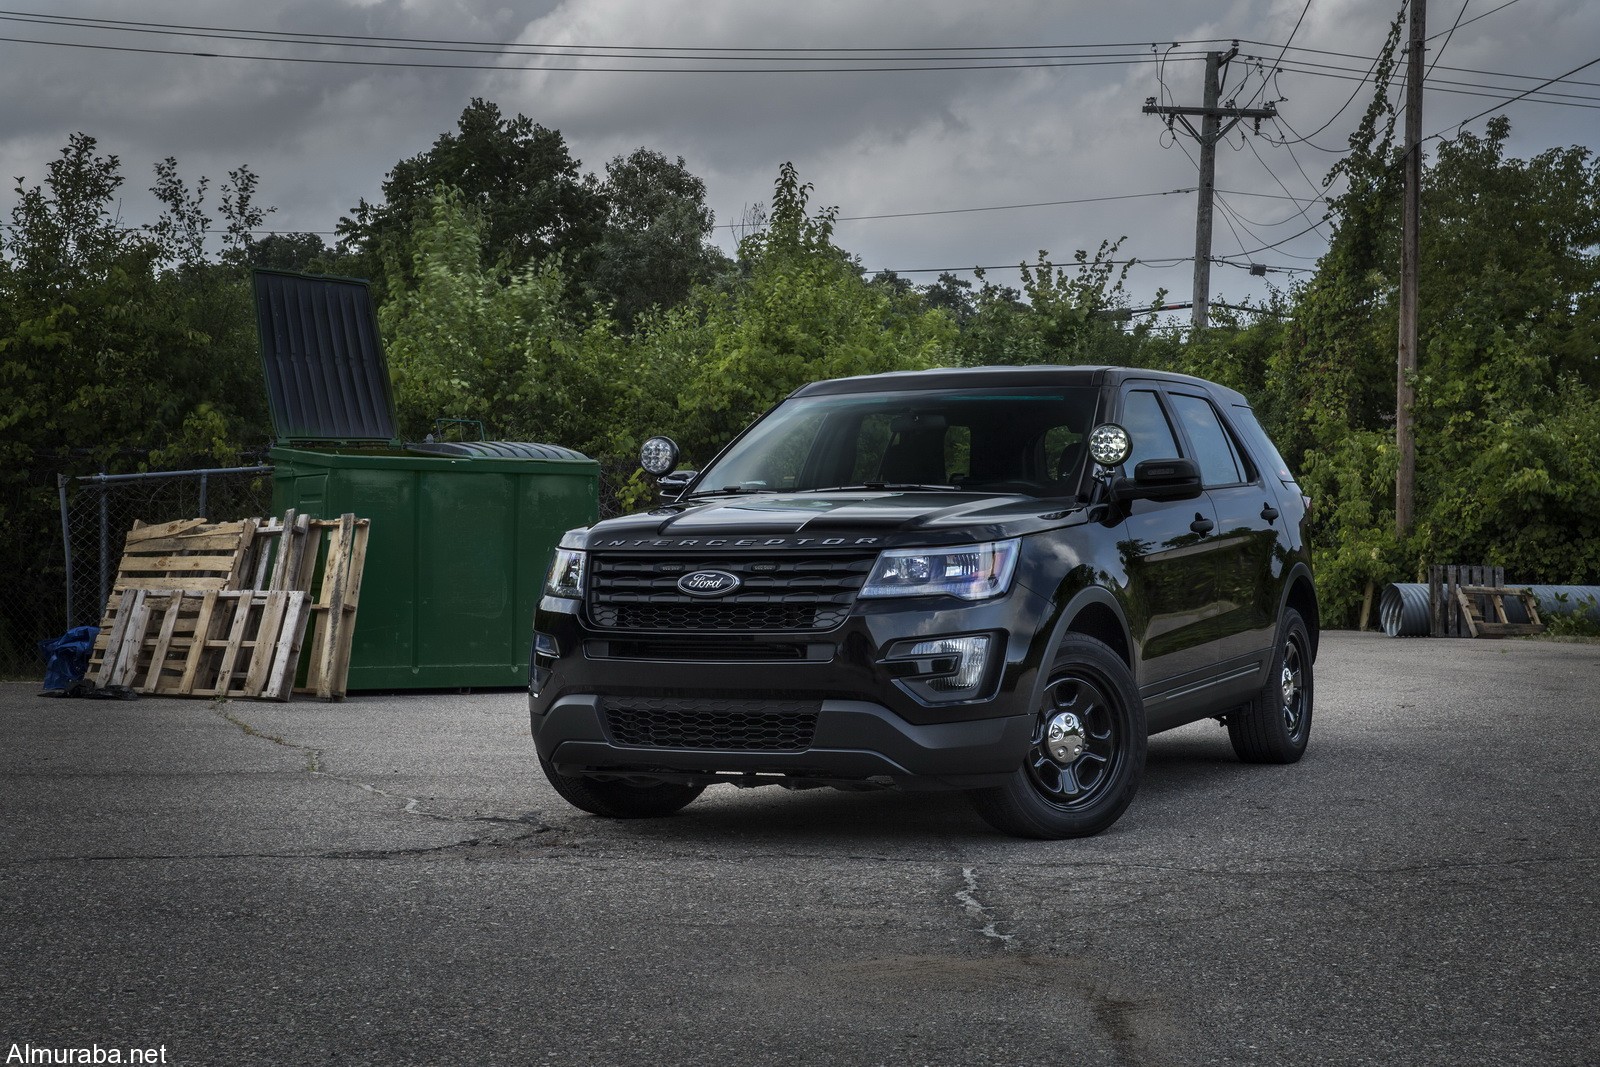 Ford now offers a super-low-profile visor light bar that mounts inside the Police Interceptor Utility to enable a stealth appearance.